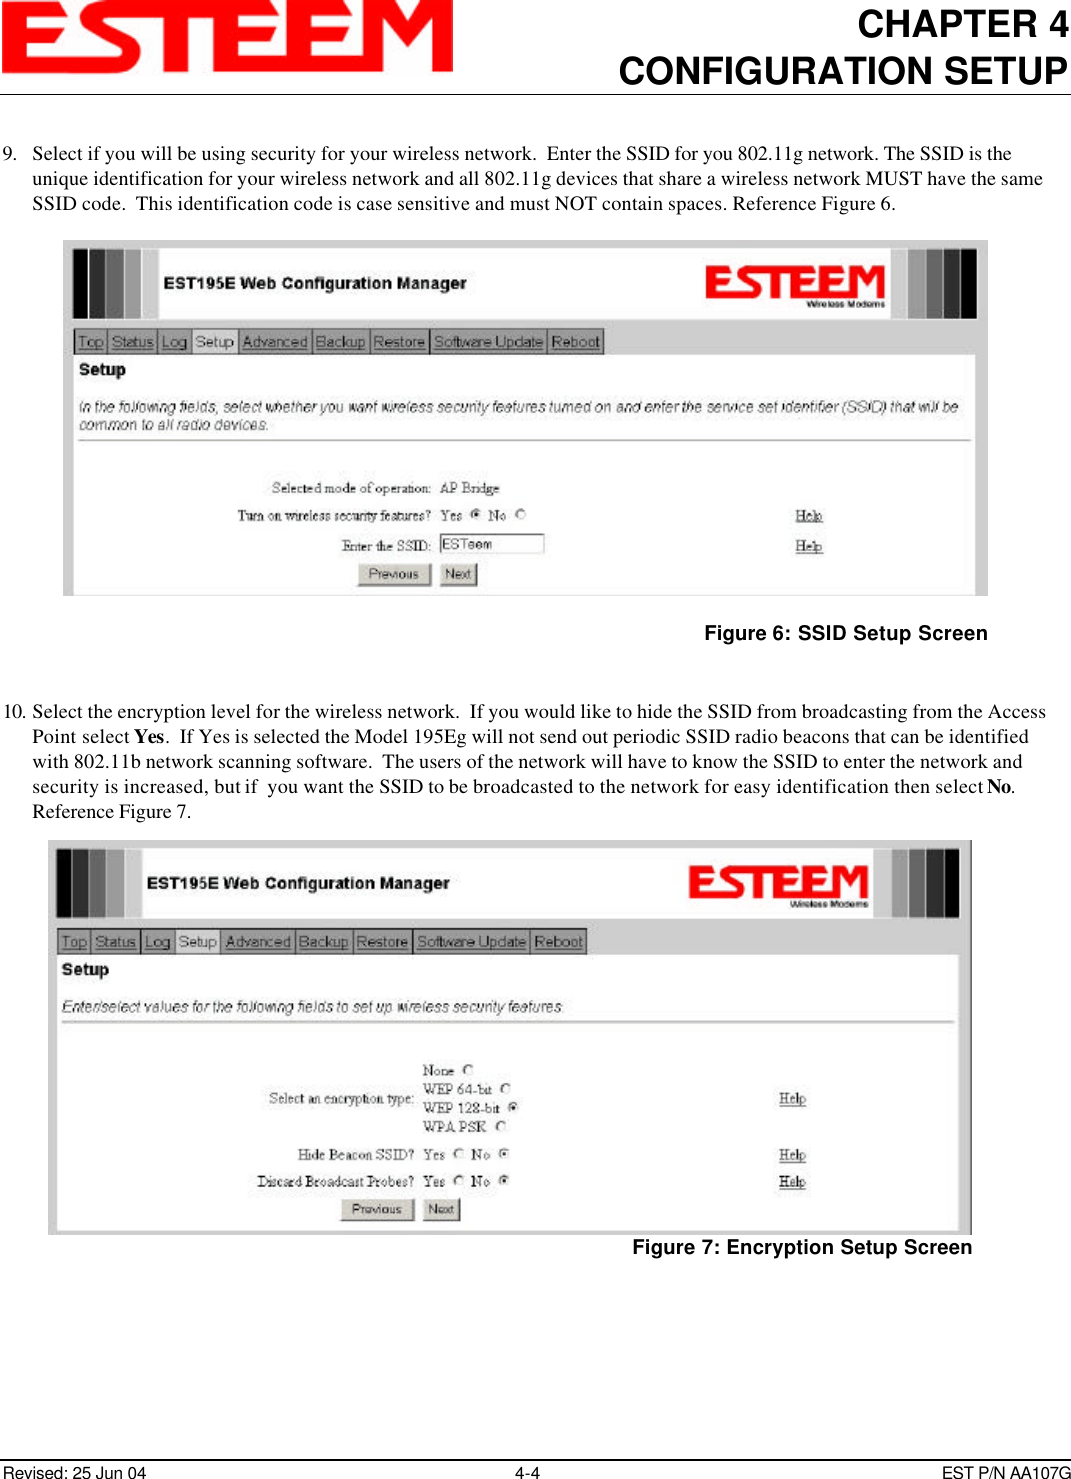 CHAPTER 4CONFIGURATION SETUPRevised: 25 Jun 04 4-4EST P/N AA107G9. Select if you will be using security for your wireless network.  Enter the SSID for you 802.11g network. The SSID is theunique identification for your wireless network and all 802.11g devices that share a wireless network MUST have the sameSSID code.  This identification code is case sensitive and must NOT contain spaces. Reference Figure 6.10. Select the encryption level for the wireless network.  If you would like to hide the SSID from broadcasting from the AccessPoint select Yes.  If Yes is selected the Model 195Eg will not send out periodic SSID radio beacons that can be identifiedwith 802.11b network scanning software.  The users of the network will have to know the SSID to enter the network andsecurity is increased, but if  you want the SSID to be broadcasted to the network for easy identification then select No.Reference Figure 7.Figure 6: SSID Setup ScreenFigure 7: Encryption Setup Screen